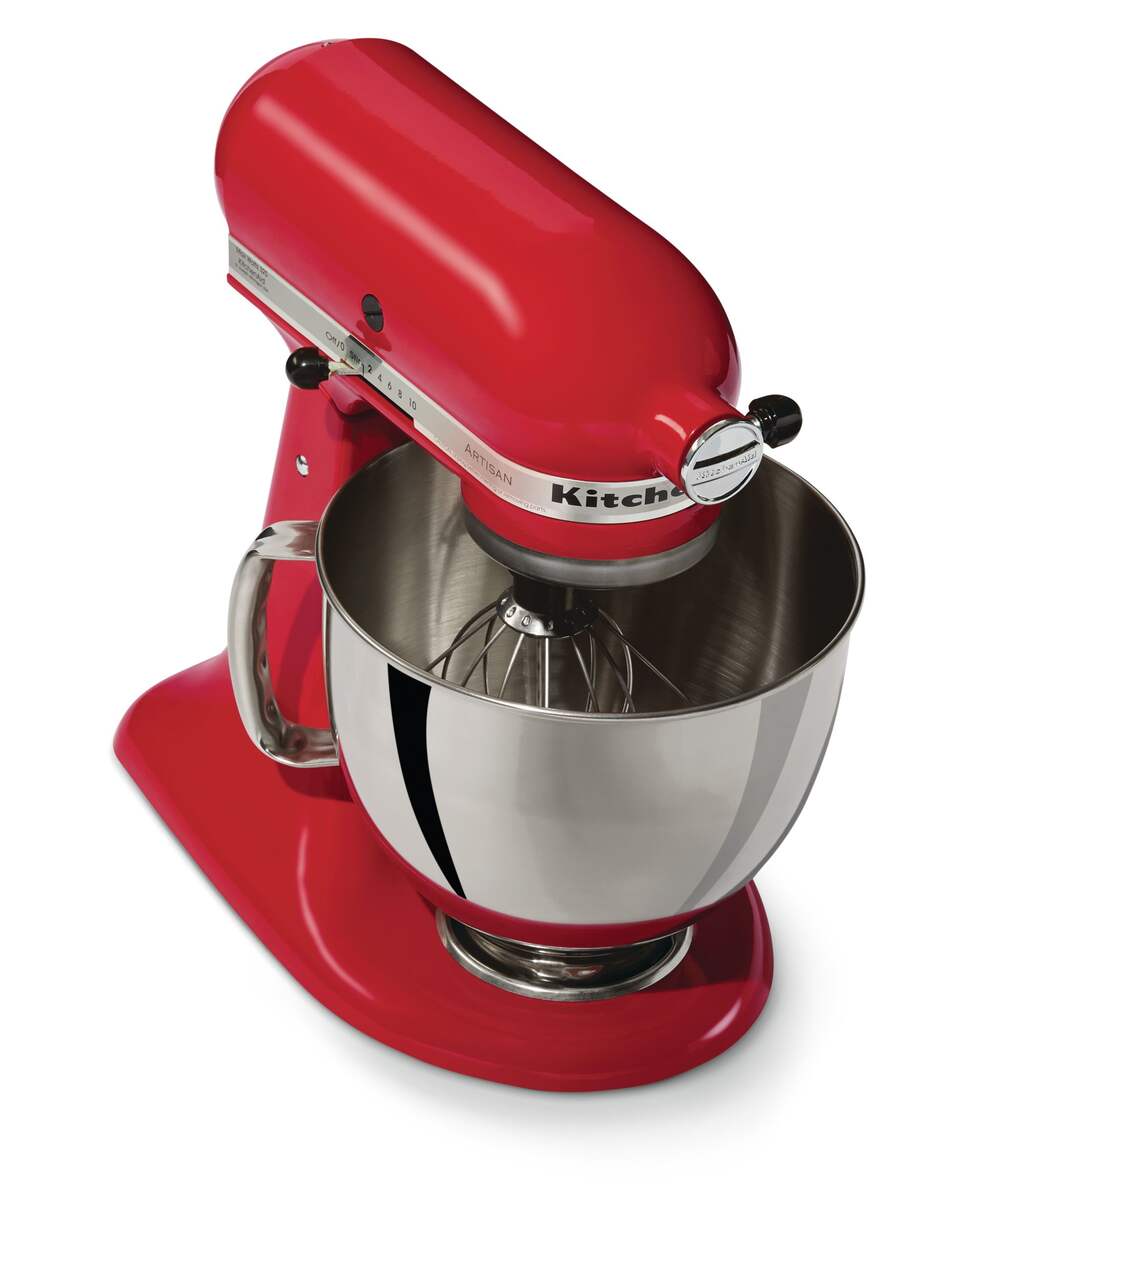 https://media-www.canadiantire.ca/product/living/kitchen/kitchen-appliances/0431406/artisan-stand-mixer-empire-red-08d67fe9-7f87-4600-9214-eeee634e5323-jpgrendition.jpg?imdensity=1&imwidth=1244&impolicy=mZoom